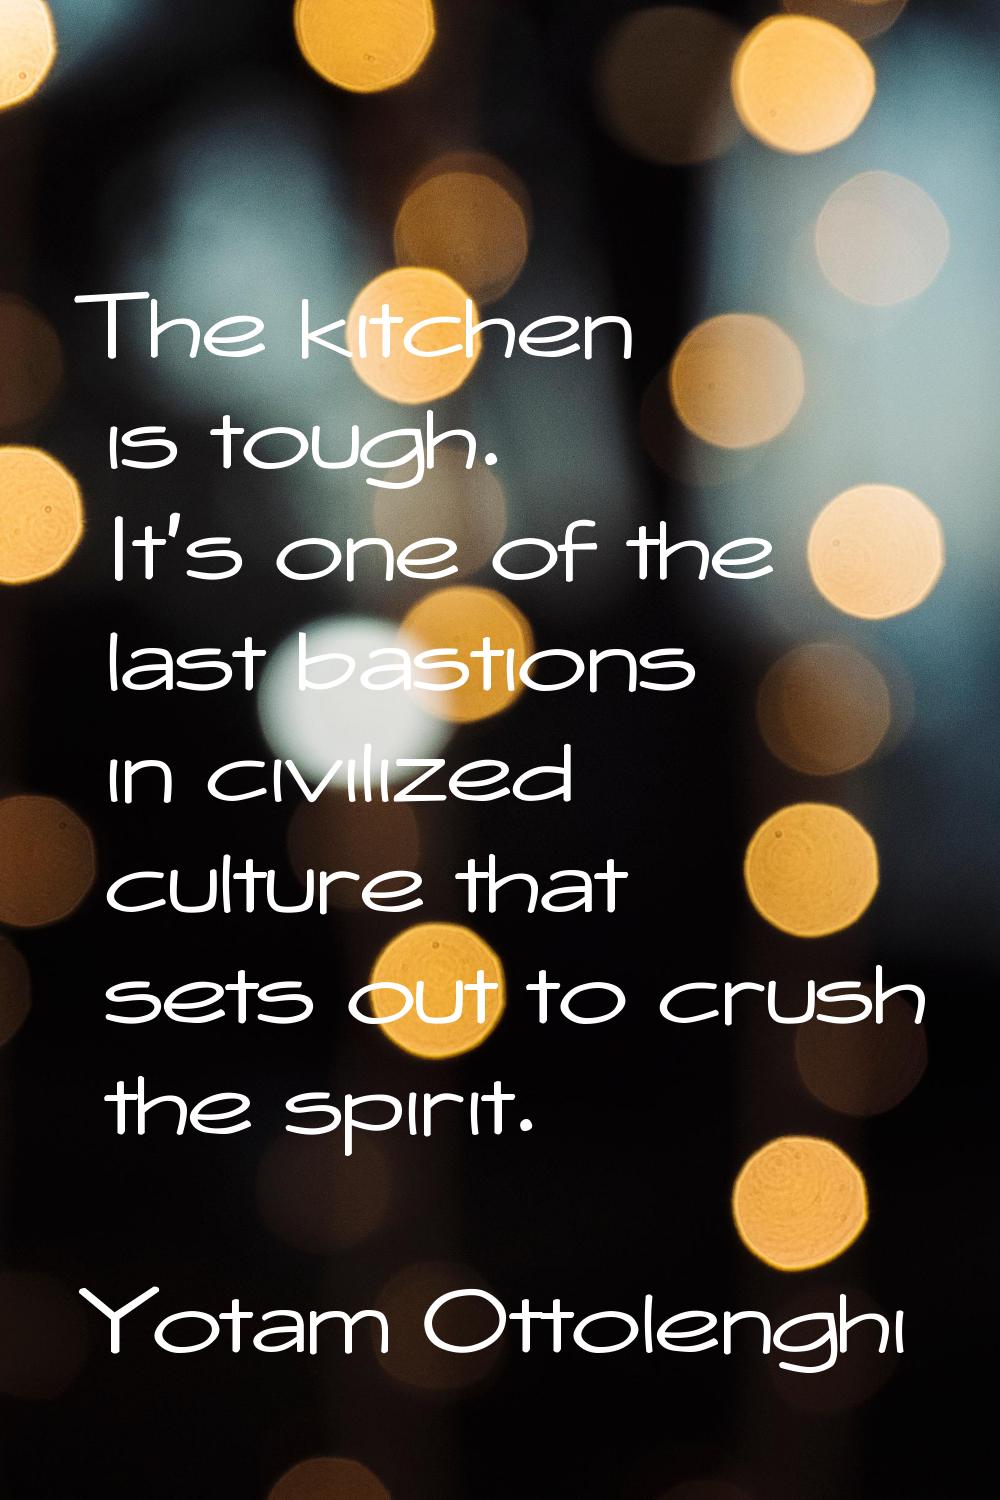 The kitchen is tough. It's one of the last bastions in civilized culture that sets out to crush the